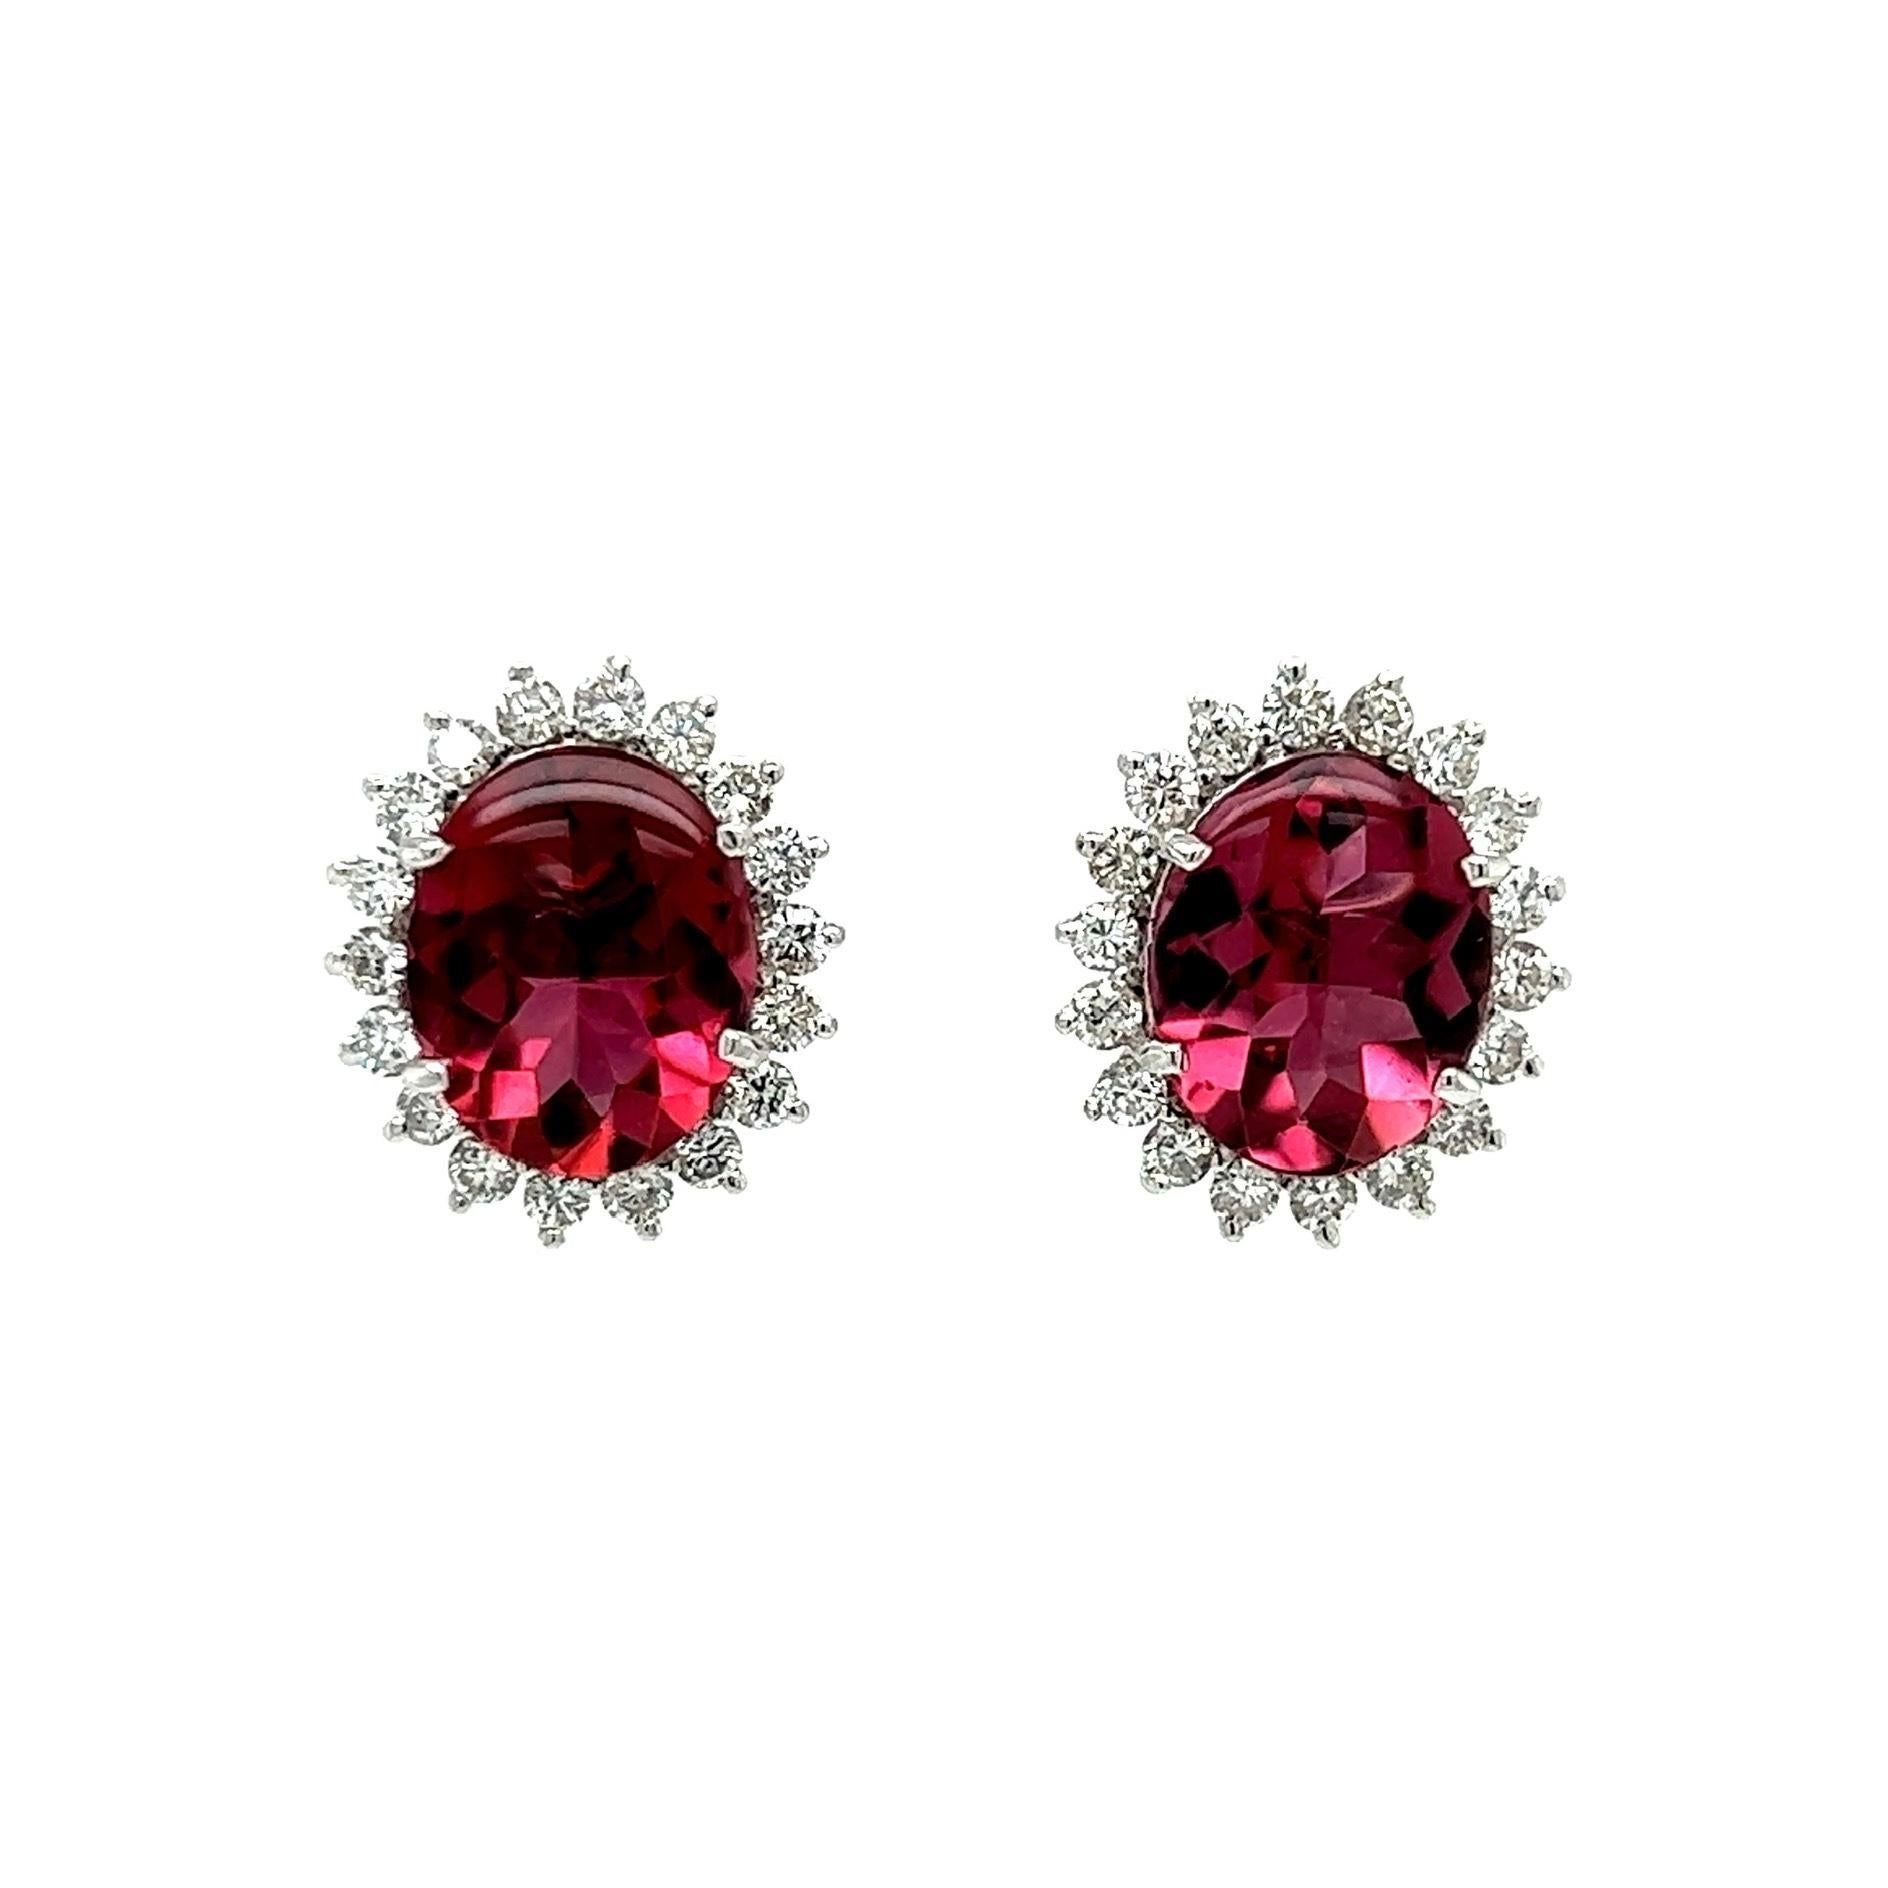 Simply Beautiful! Rubellite Tourmaline and Diamond Earrings. Each earring centering a securely nestled Hand set Oval Rubellite Tourmaline, 4.82tcw of 2 Tourmalines. Surrounded by Diamonds, approx. 0.70tcw. Approx. Dimensions: 0.67